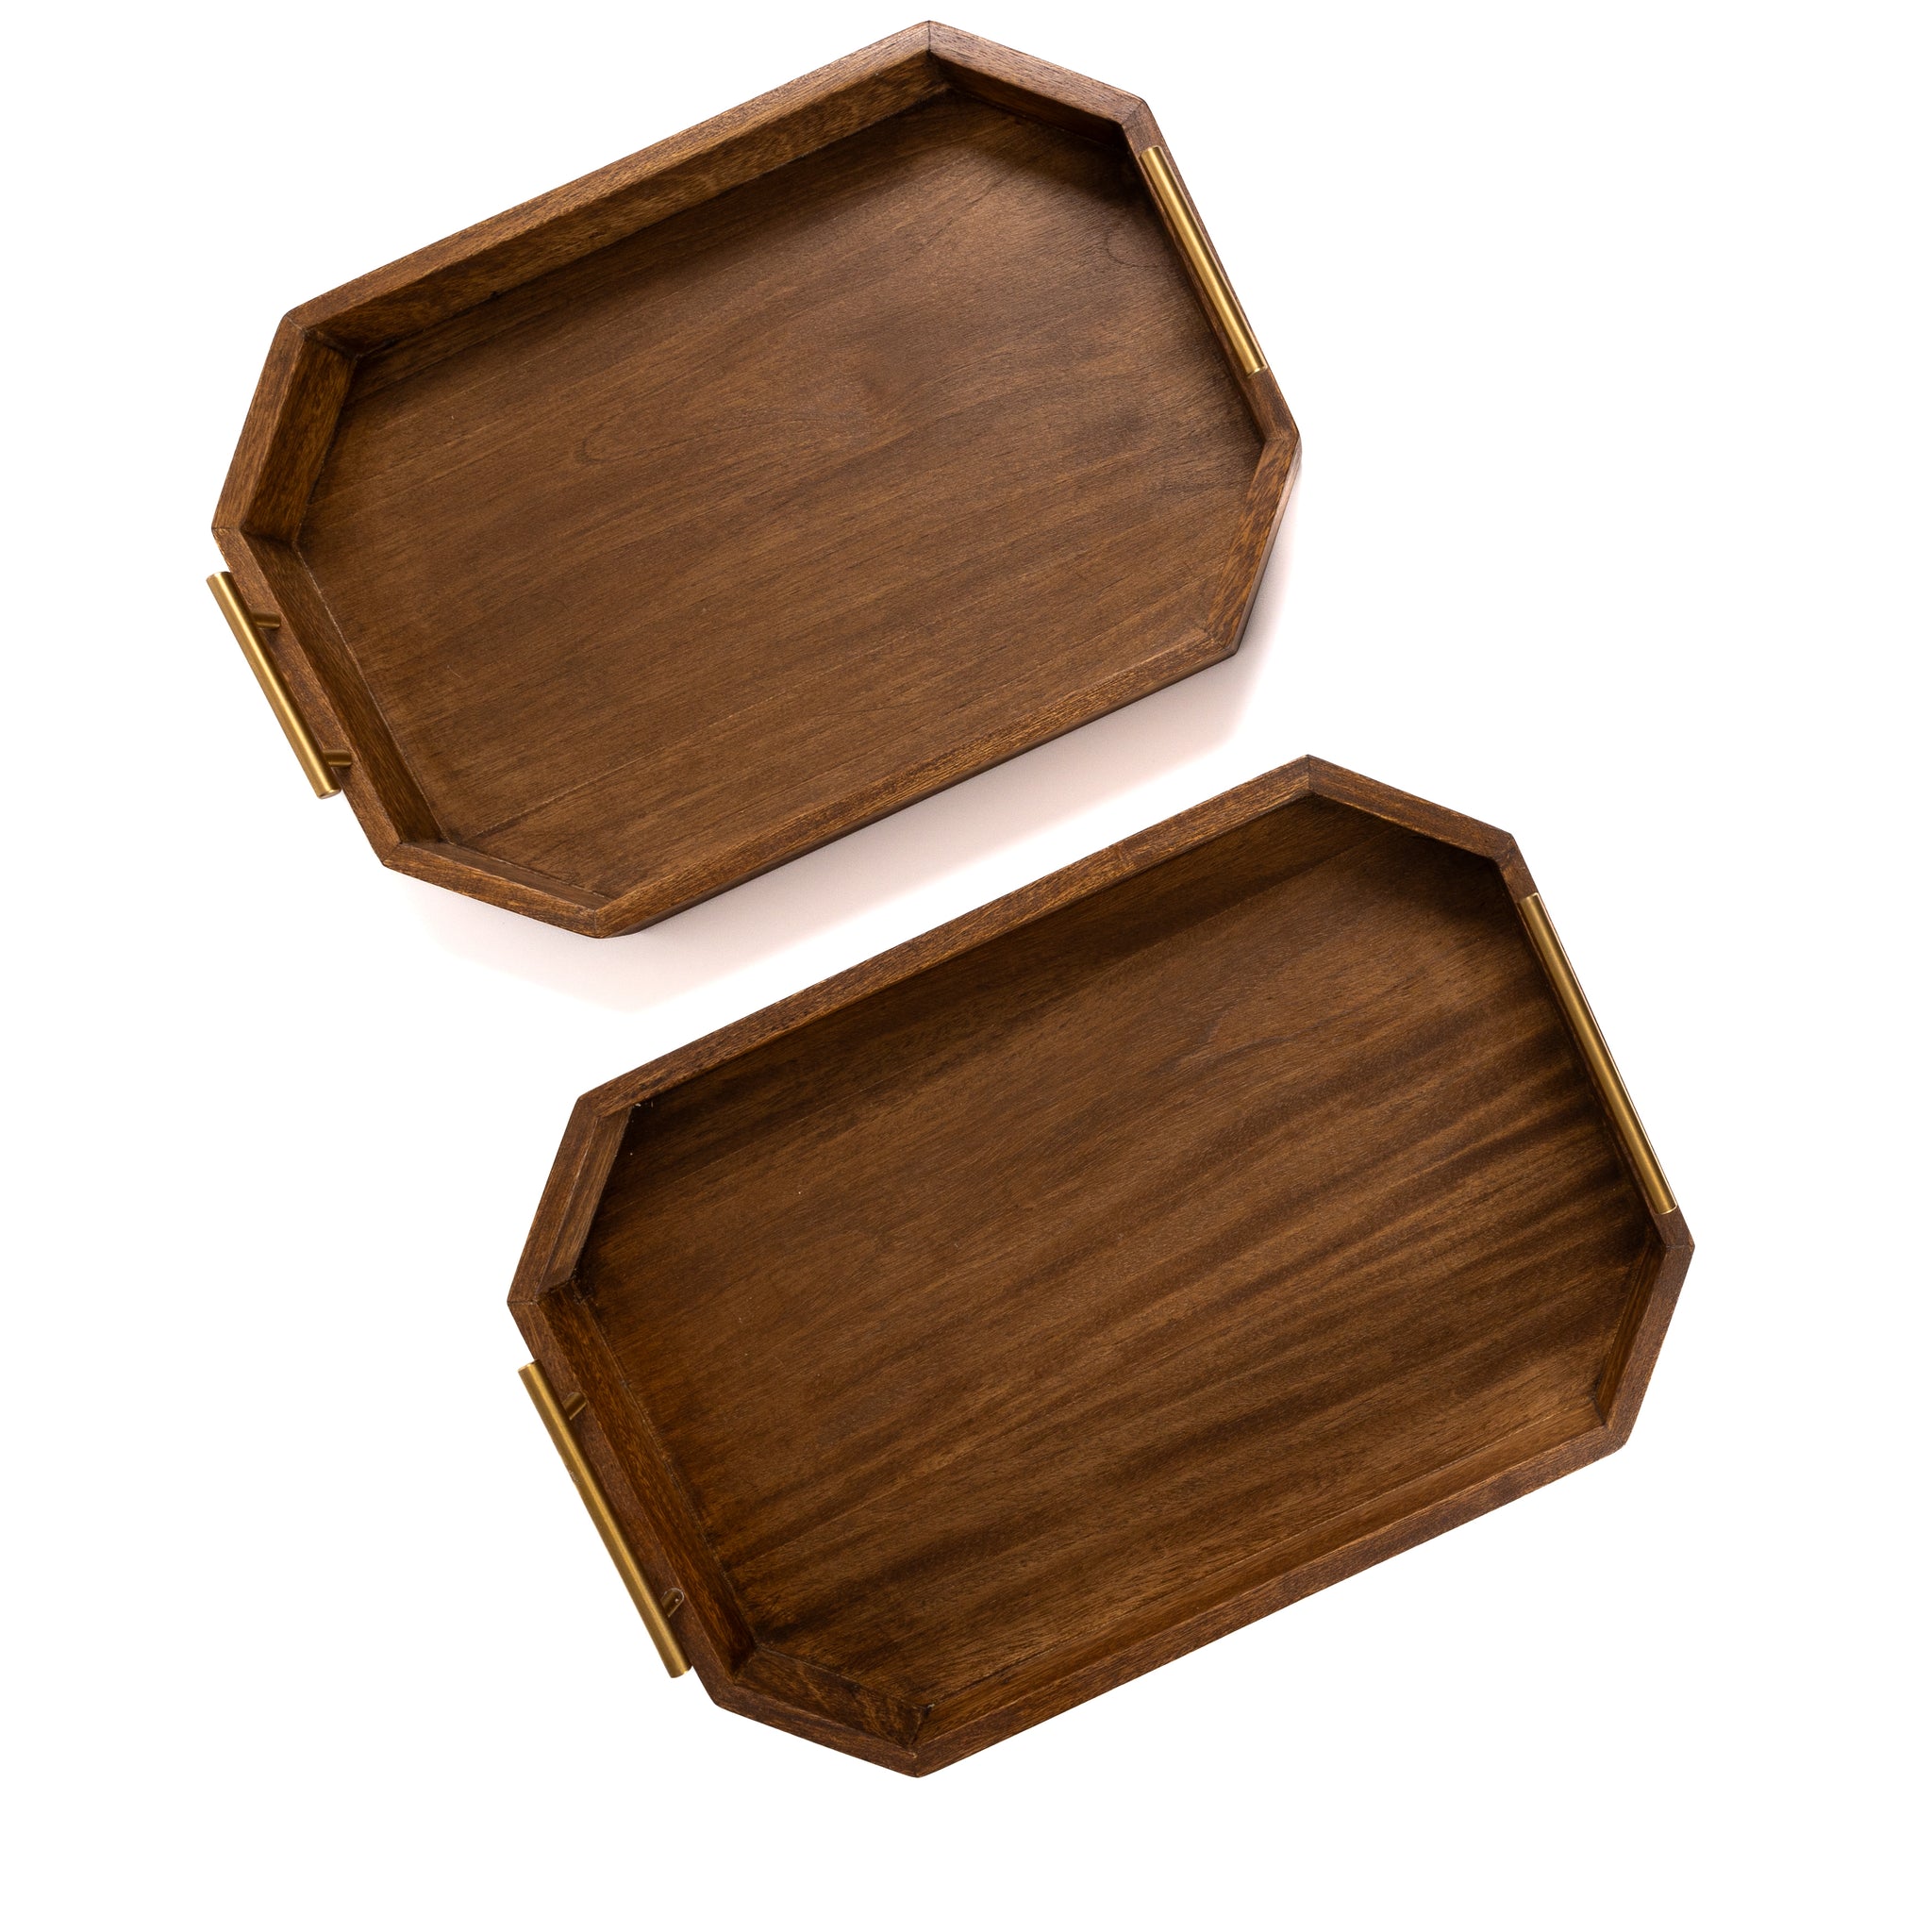 NATURAL SOLID WOODEN TRAY WITH HEXAGONAL PROFILE